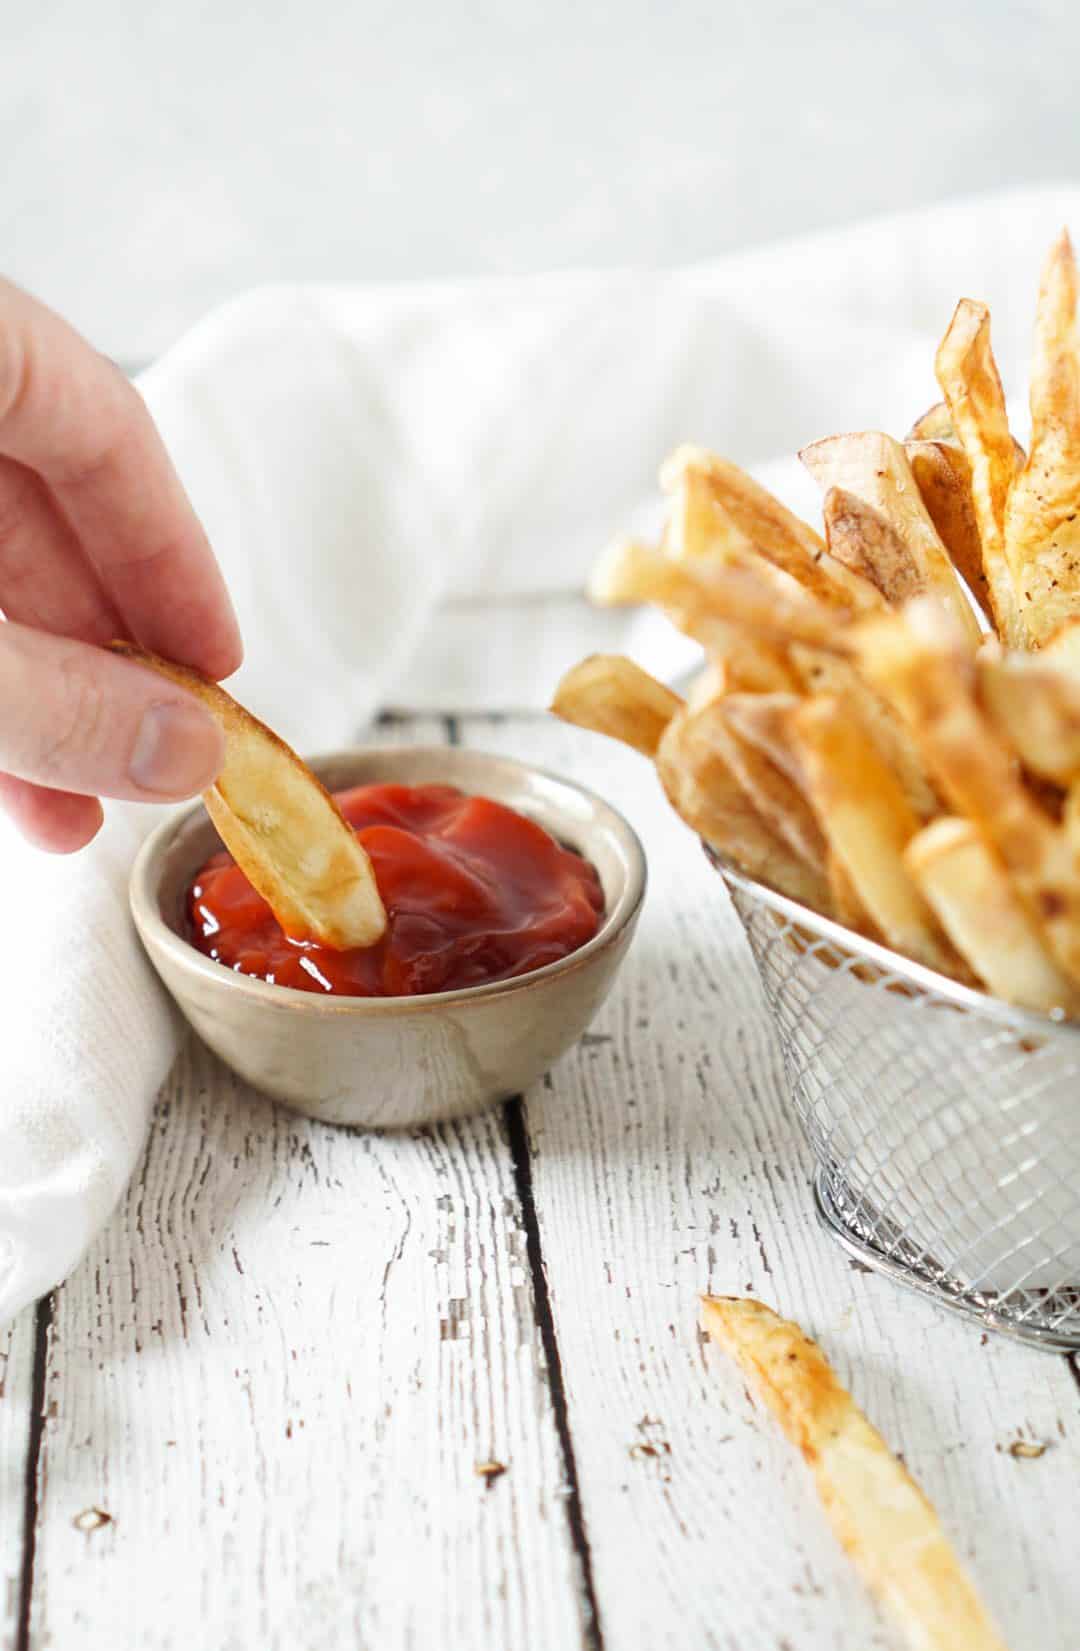 french fry dipped in ketchup and fries in a basket